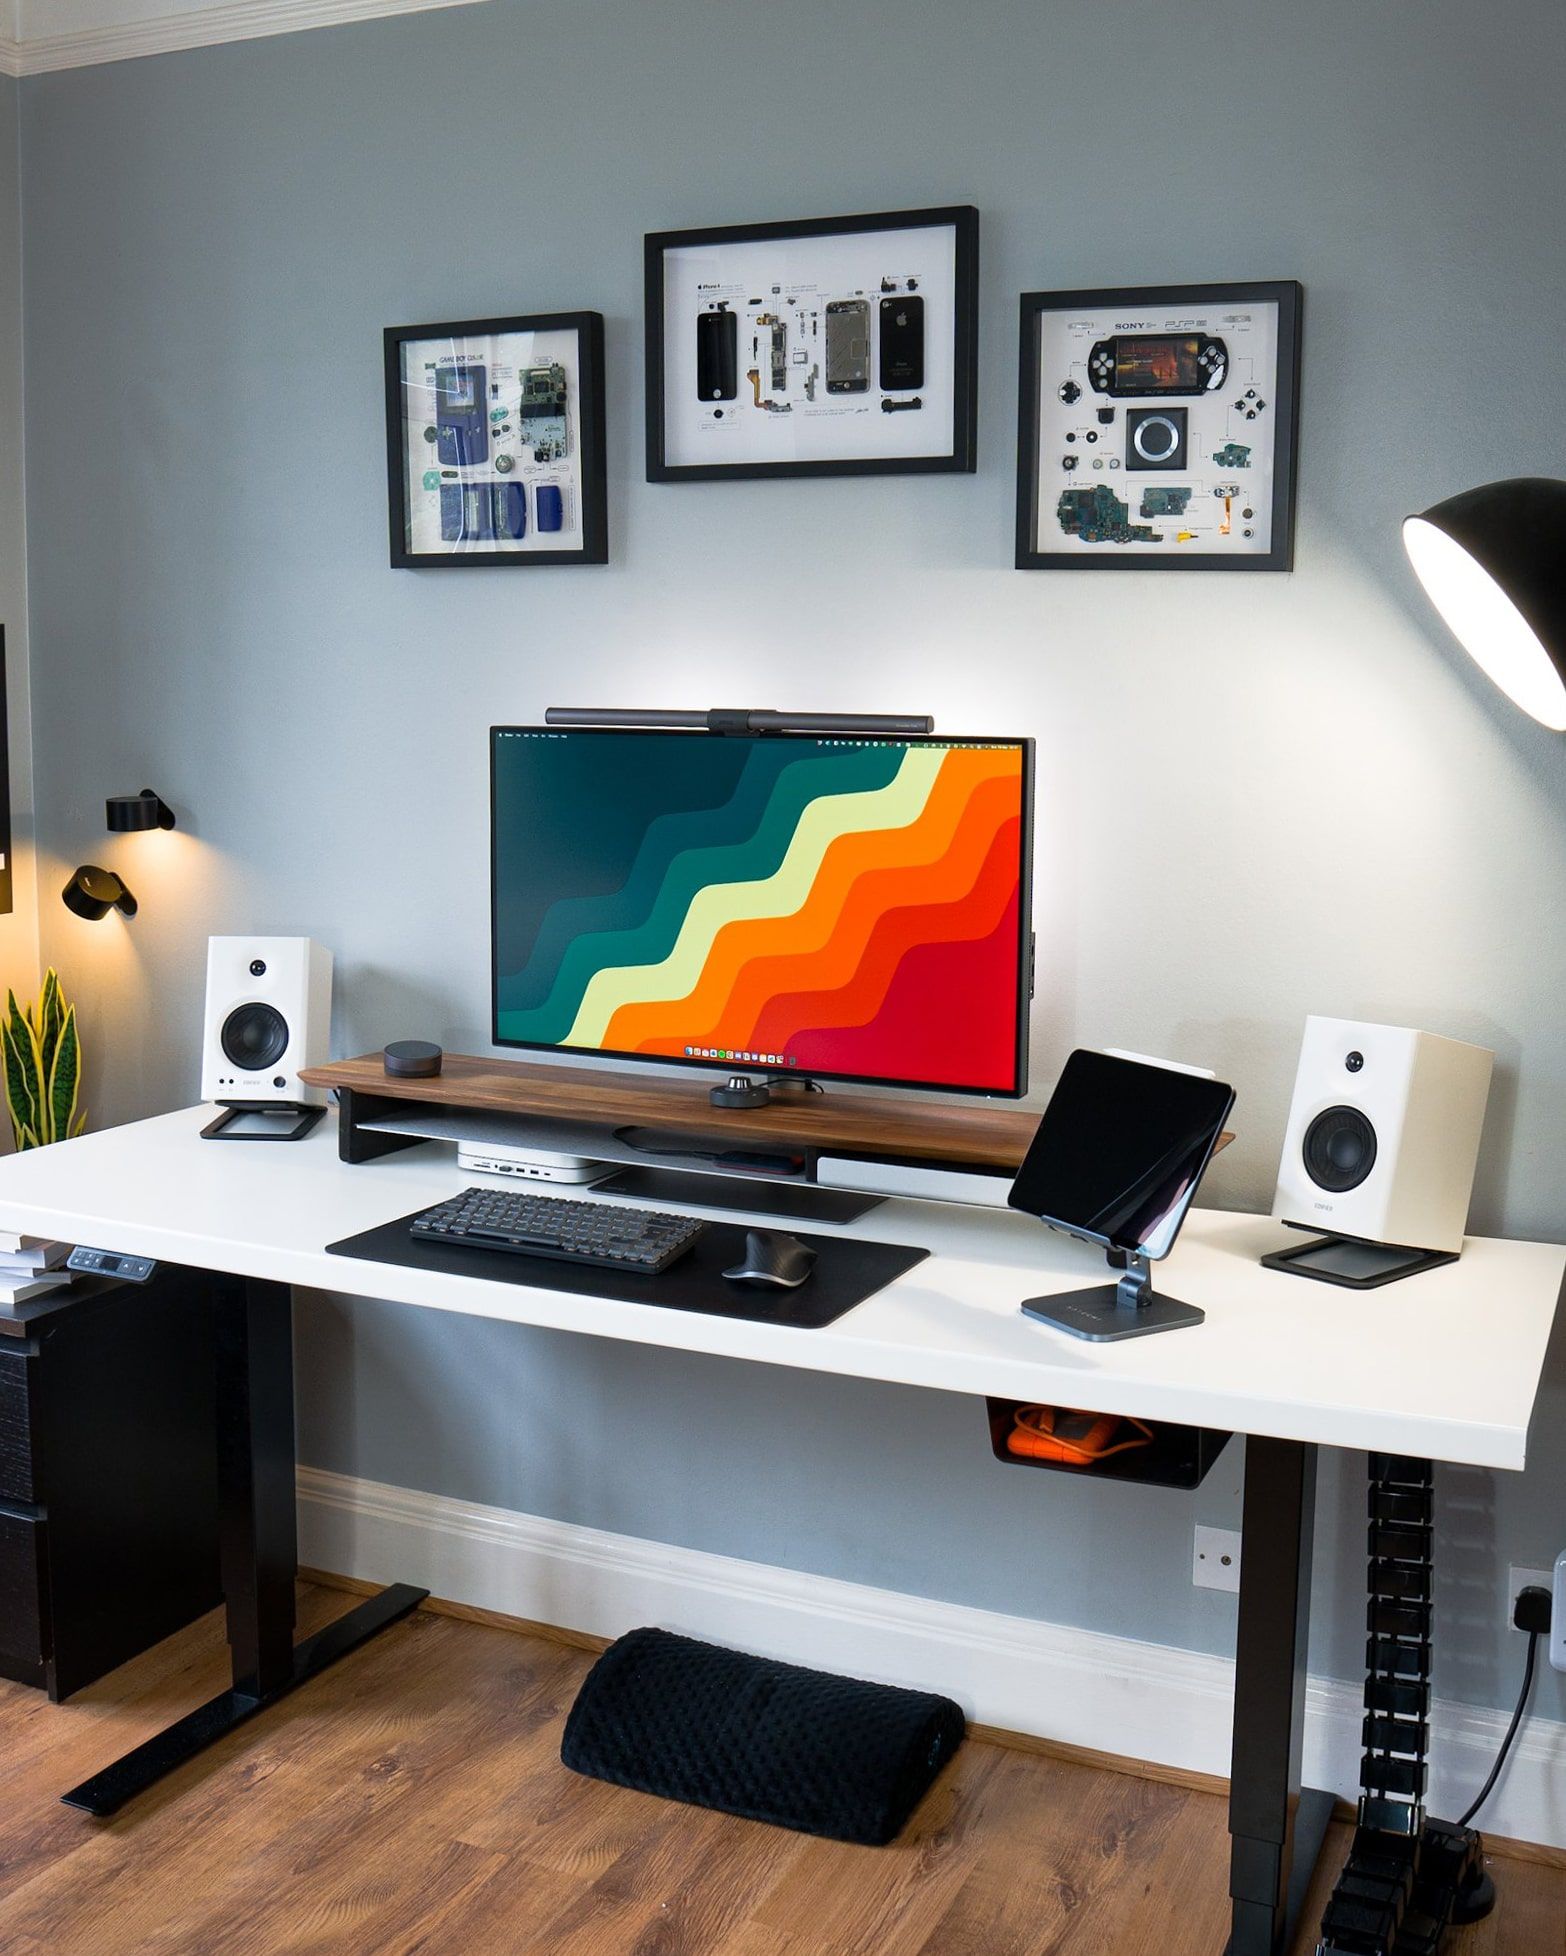 The Essentials of a Minimalist Home Office